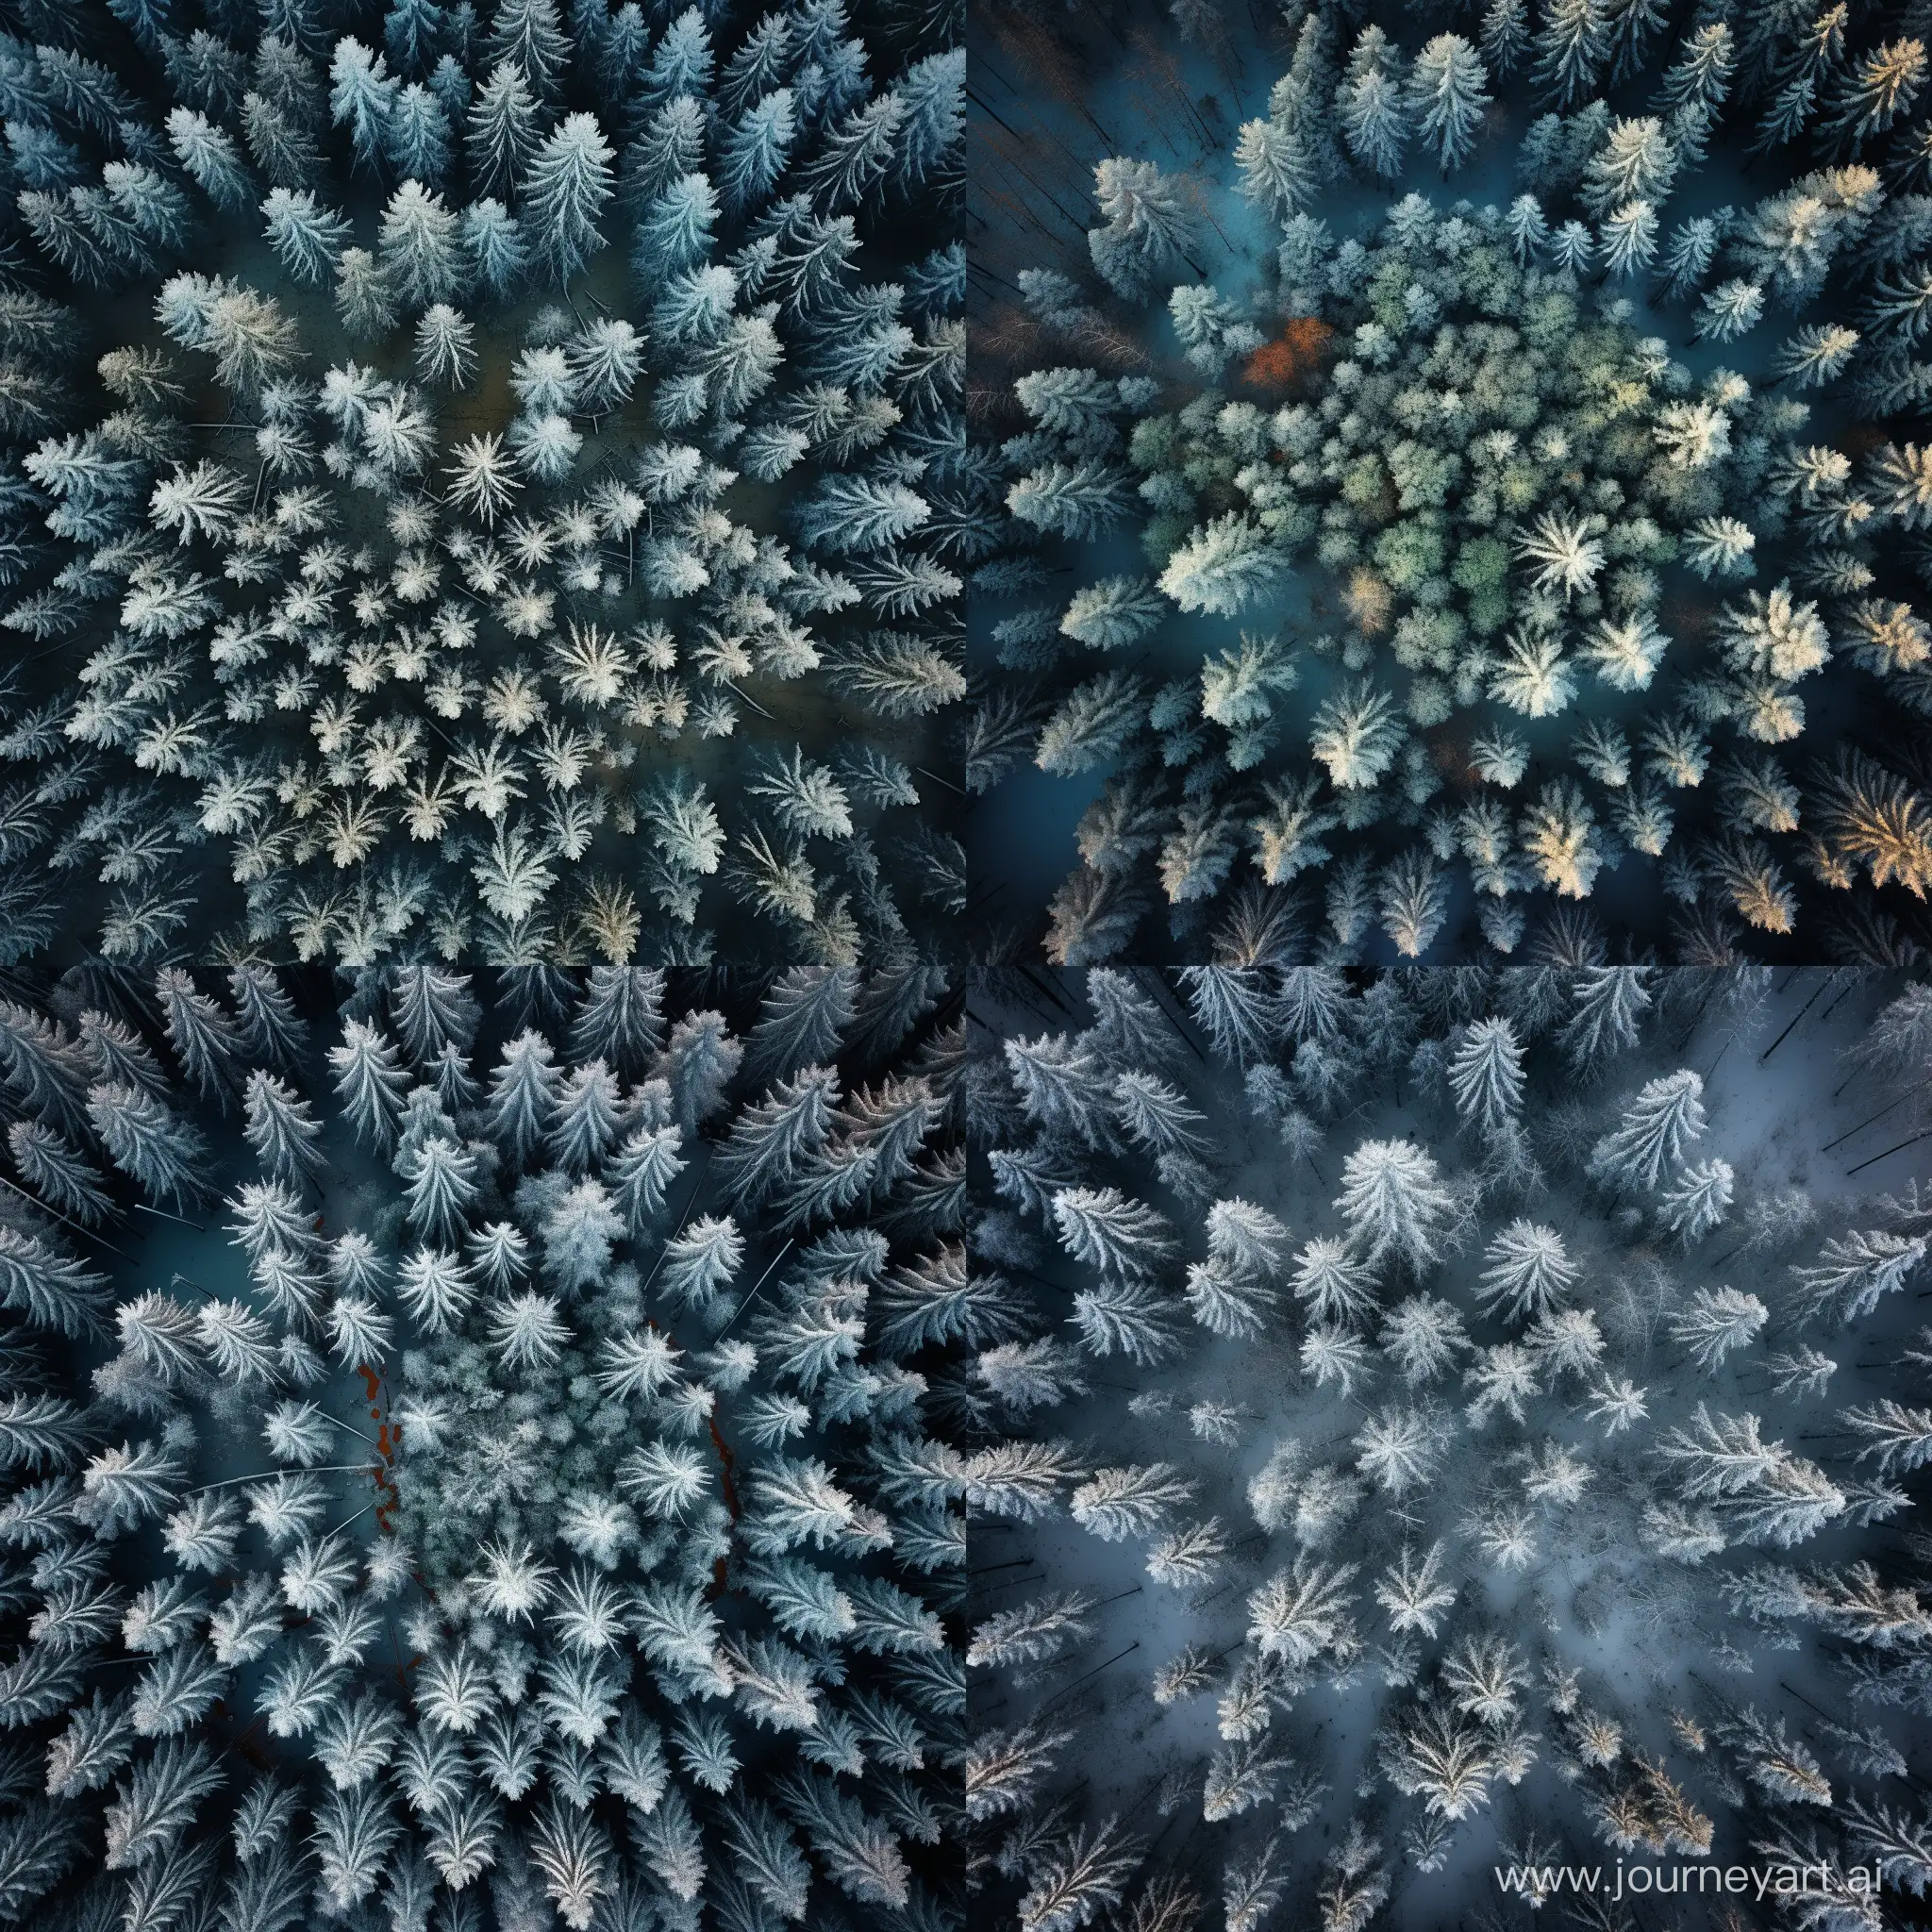 Icy-Treetops-A-Surreal-Aerial-View-of-a-Frozen-Forest-at-50-Celsius